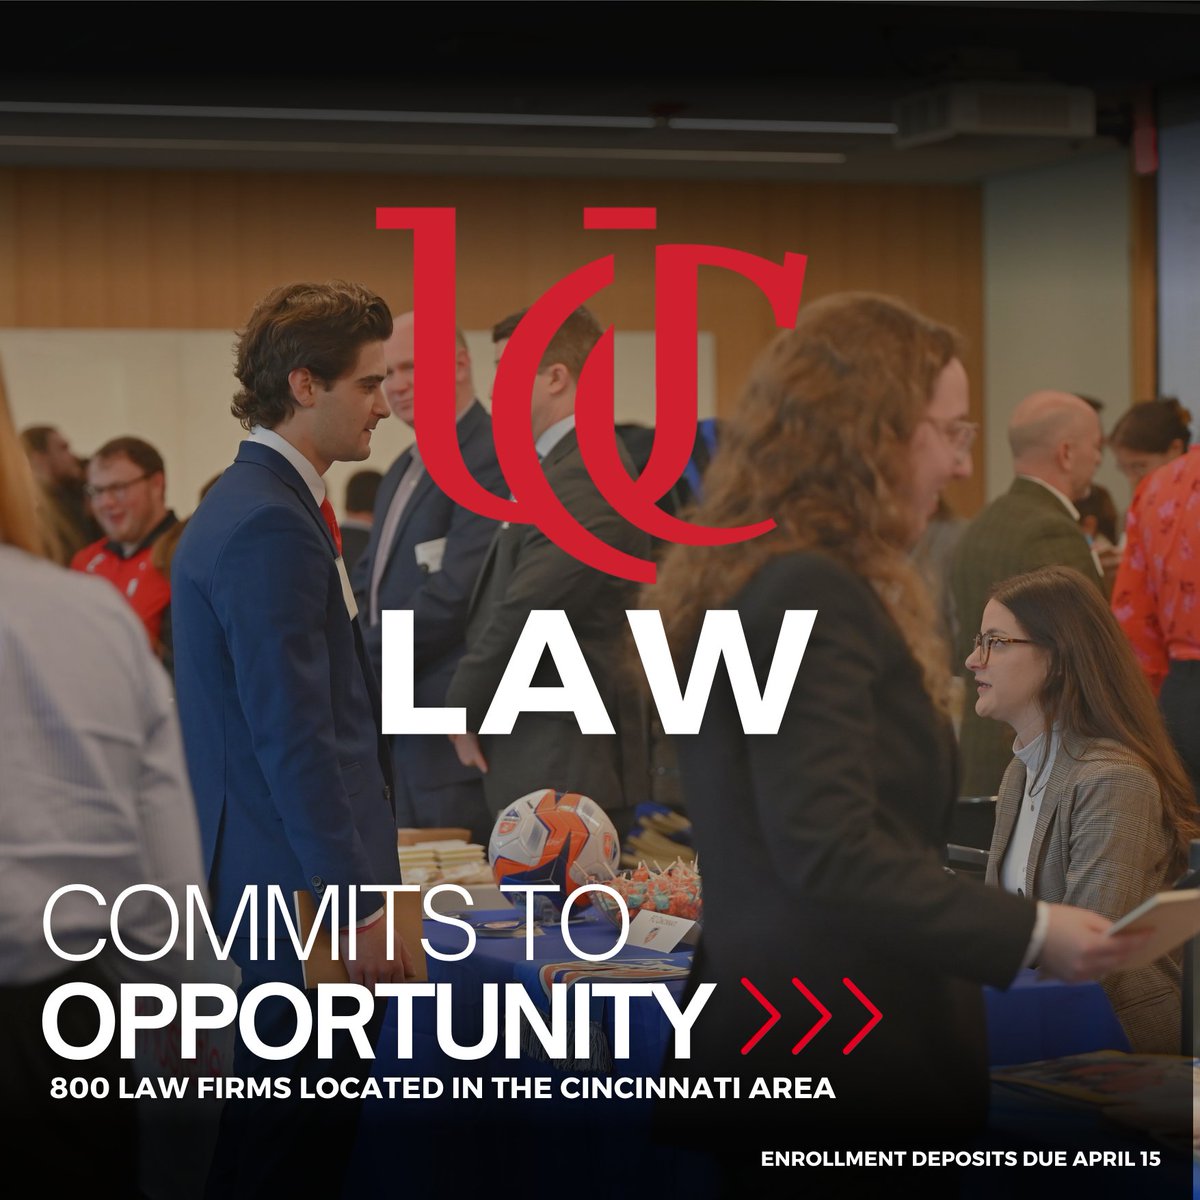 UC Law COMMITS TO OPPORTUNITY! Did you know? With 800 law firms located in the Cincinnati area, our students have unparalleled access to diverse opportunities for internships, clerkships, and networking. Join us in embracing the countless pathways to success at UC LAW!